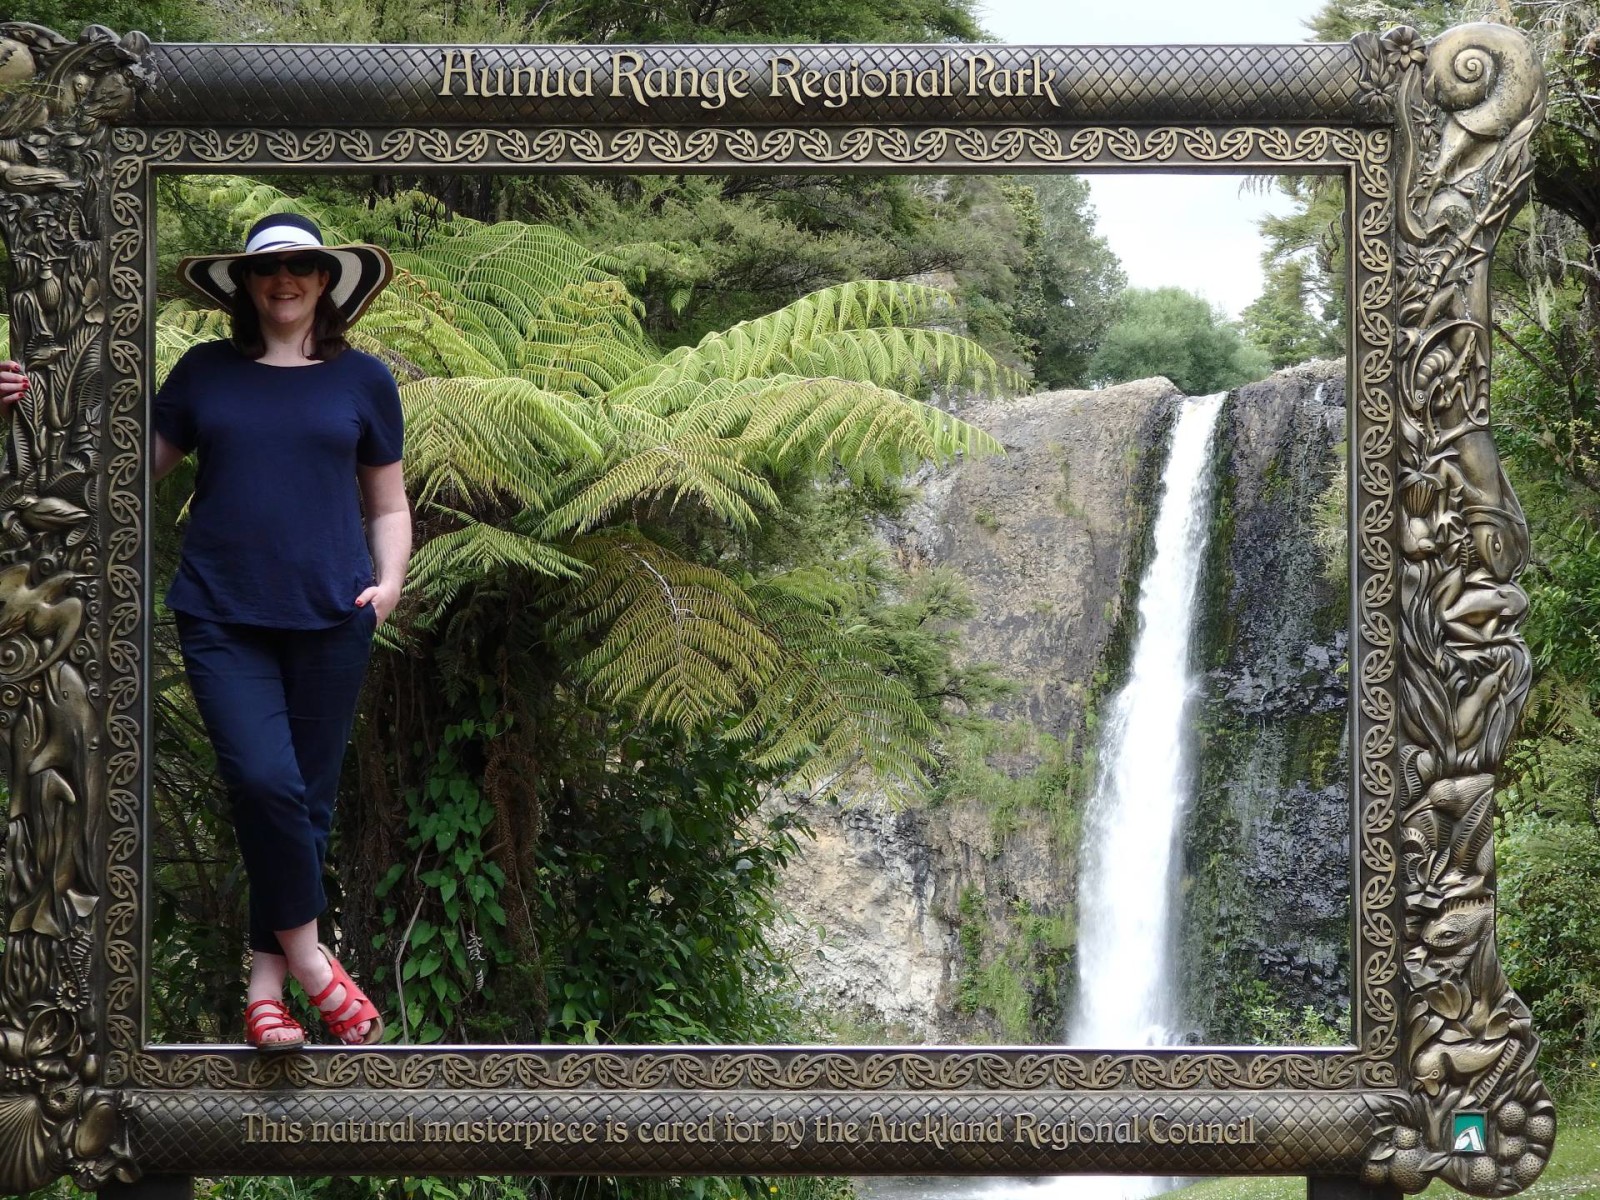 New Zealand Travel InspirationLooking for things to do in Auckland City then why not visit the Hunua Falls in South Auckland which is a super little New Zealand hiking spot and a gorgeous waterfall. Add this Regional Park to your New Zealand Bucket List. Click on the link to see more photos and travel tips for Auckland, New Zealand.